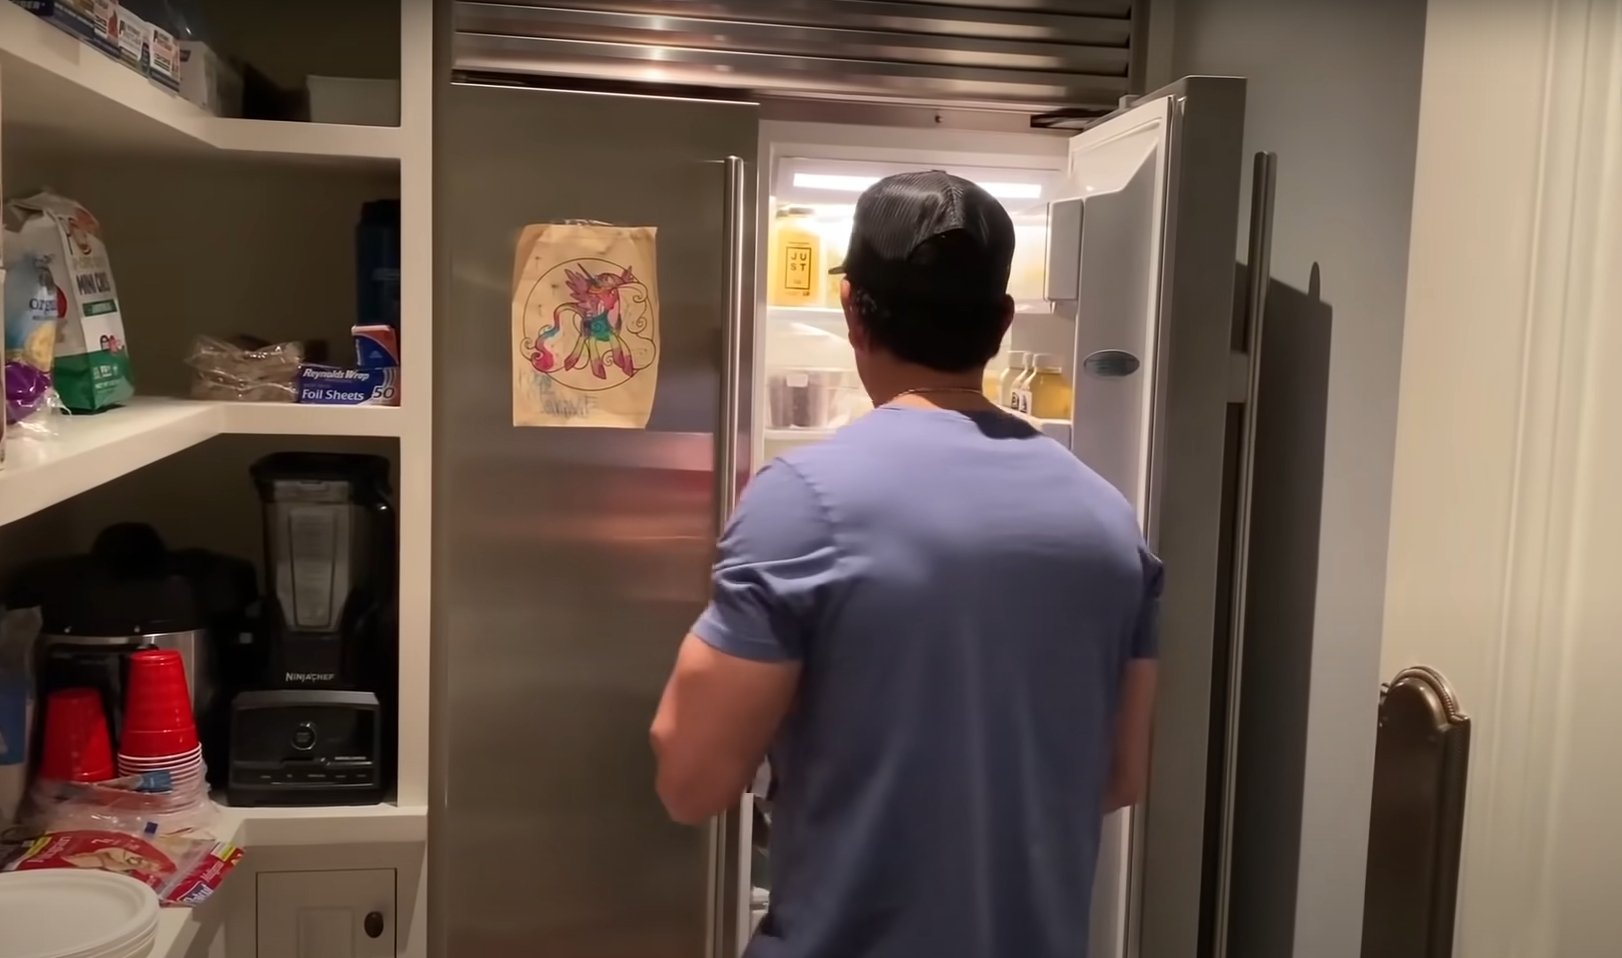 Pictured: Mark Wahlberg showing off what he keeps in his fridge under a healthy diet on Men's Health "Gym & Fridge" | YouTube/@MensHealth